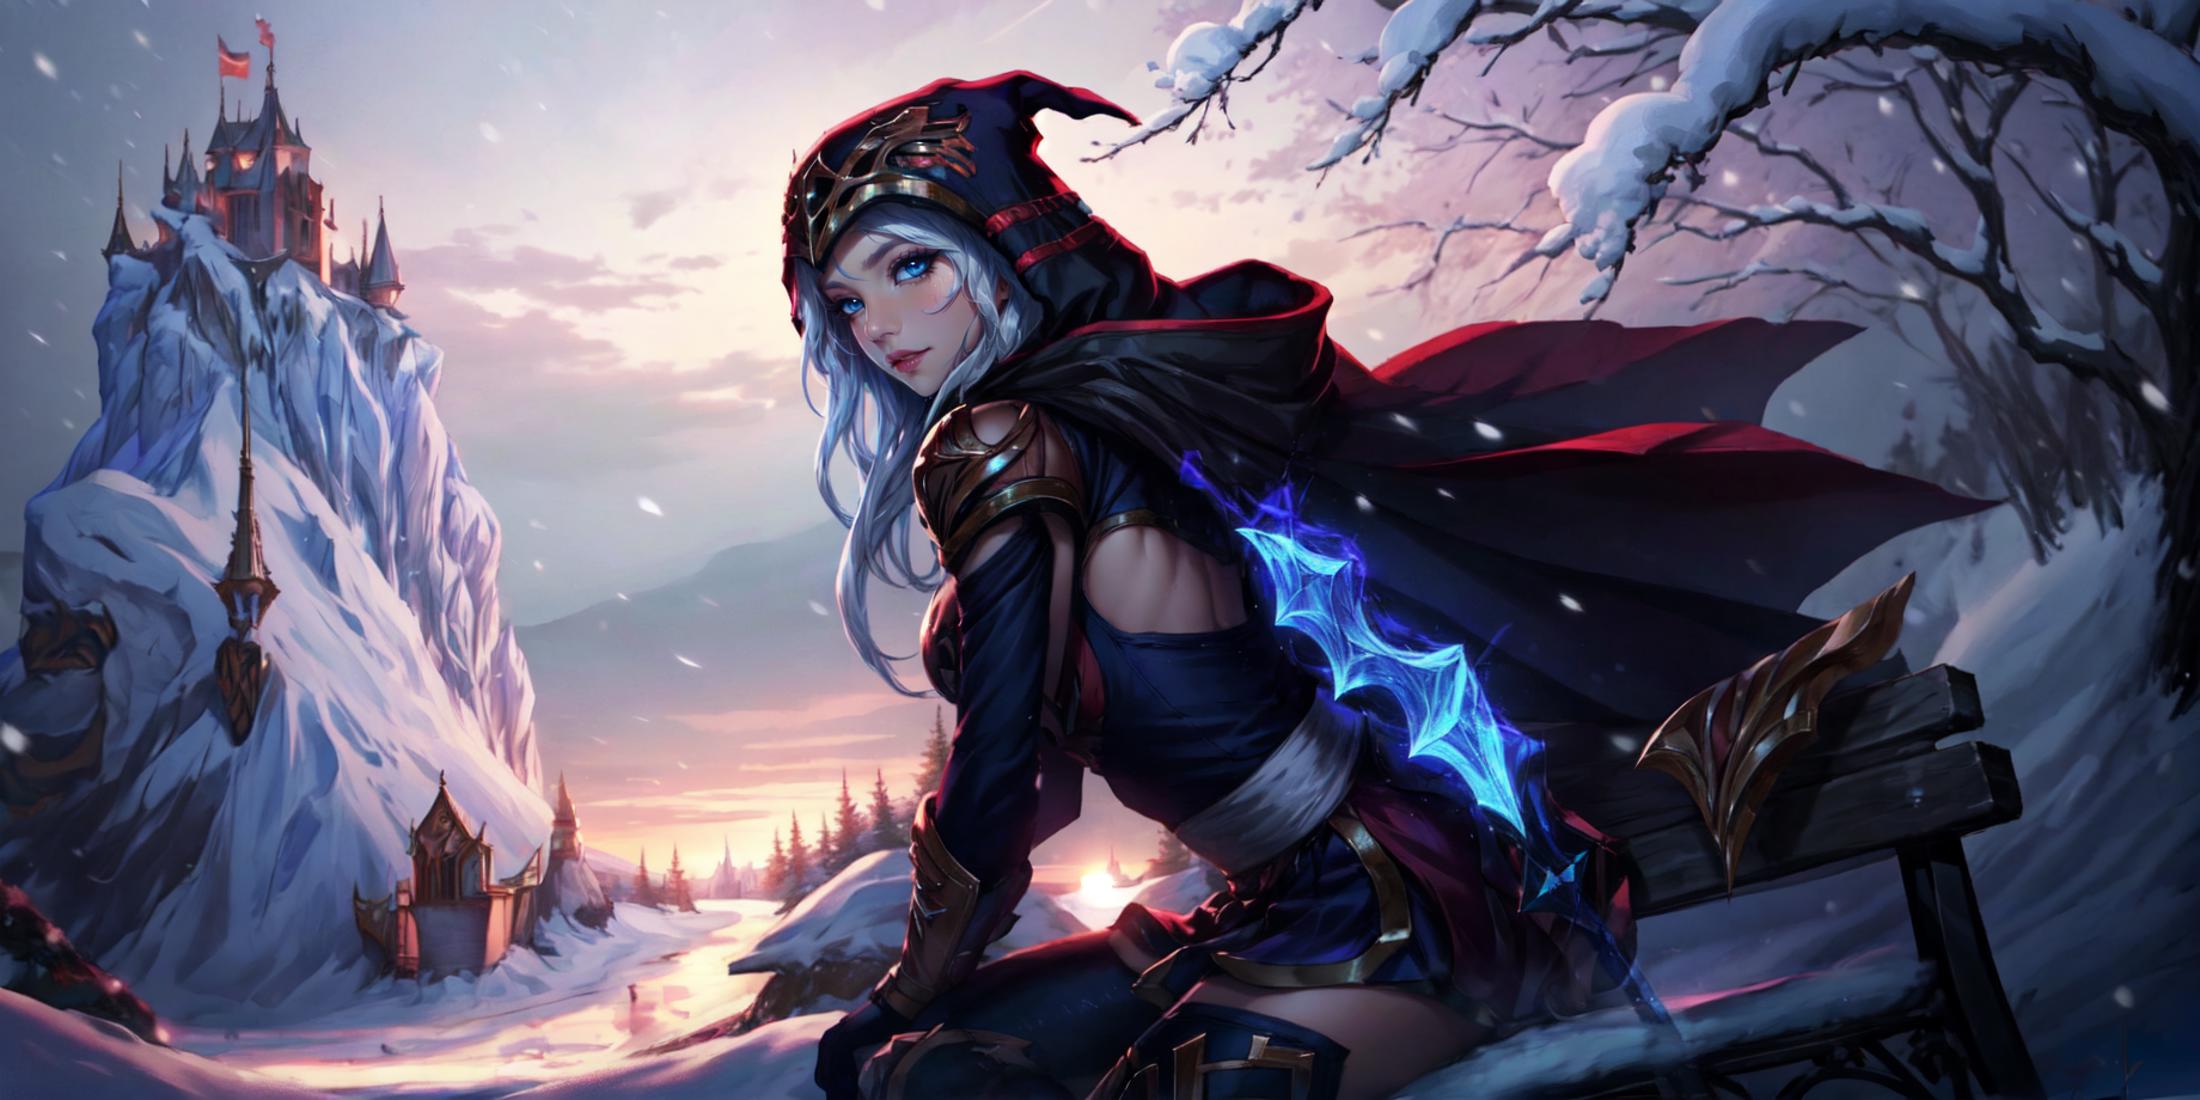 Ashe from League of Legends image by Stabile_Durchmischung